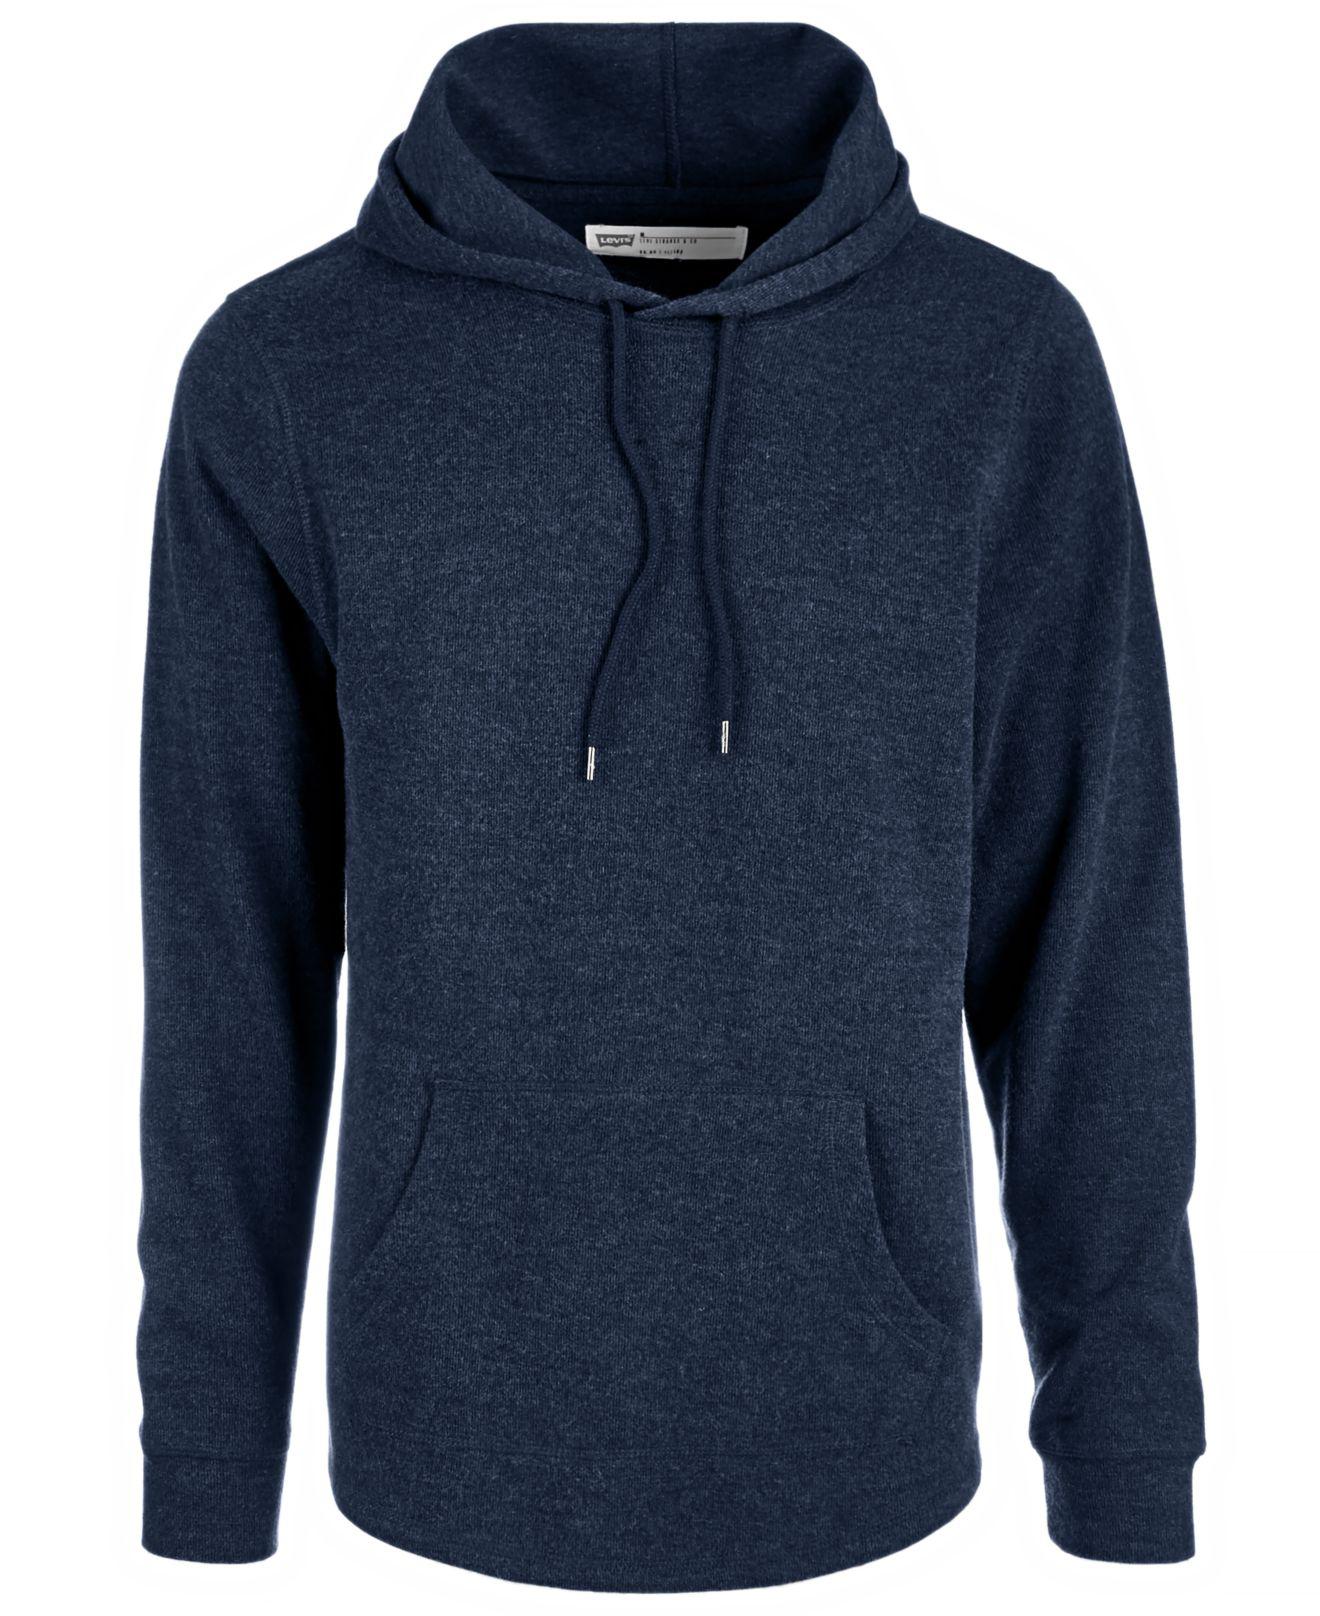 Levi's Banner Brushed Hoodie in Blue for Men - Lyst